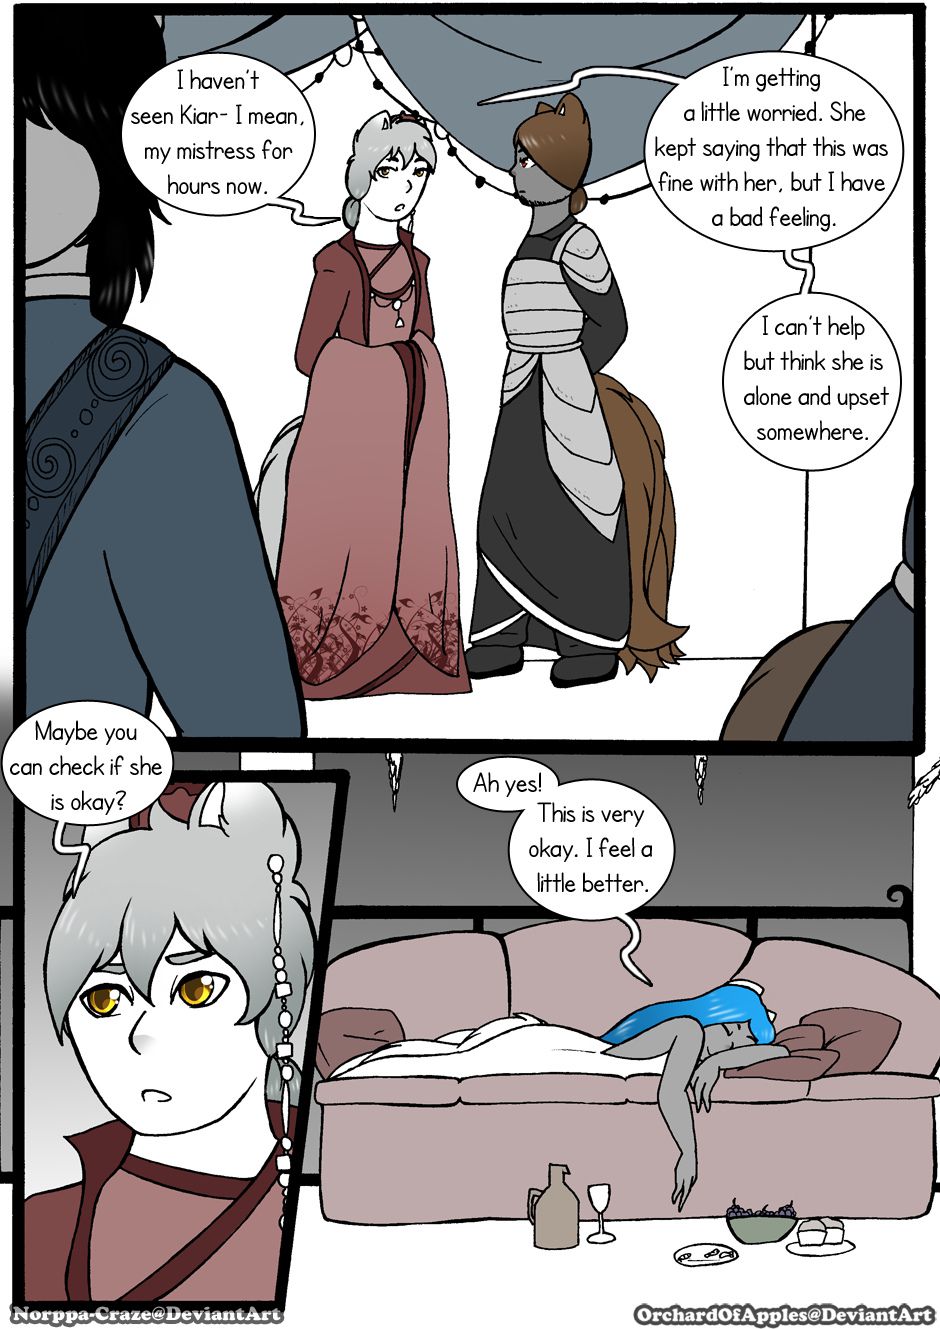 [Jeny-jen94] Between Kings and Queens [Ongoing] 245